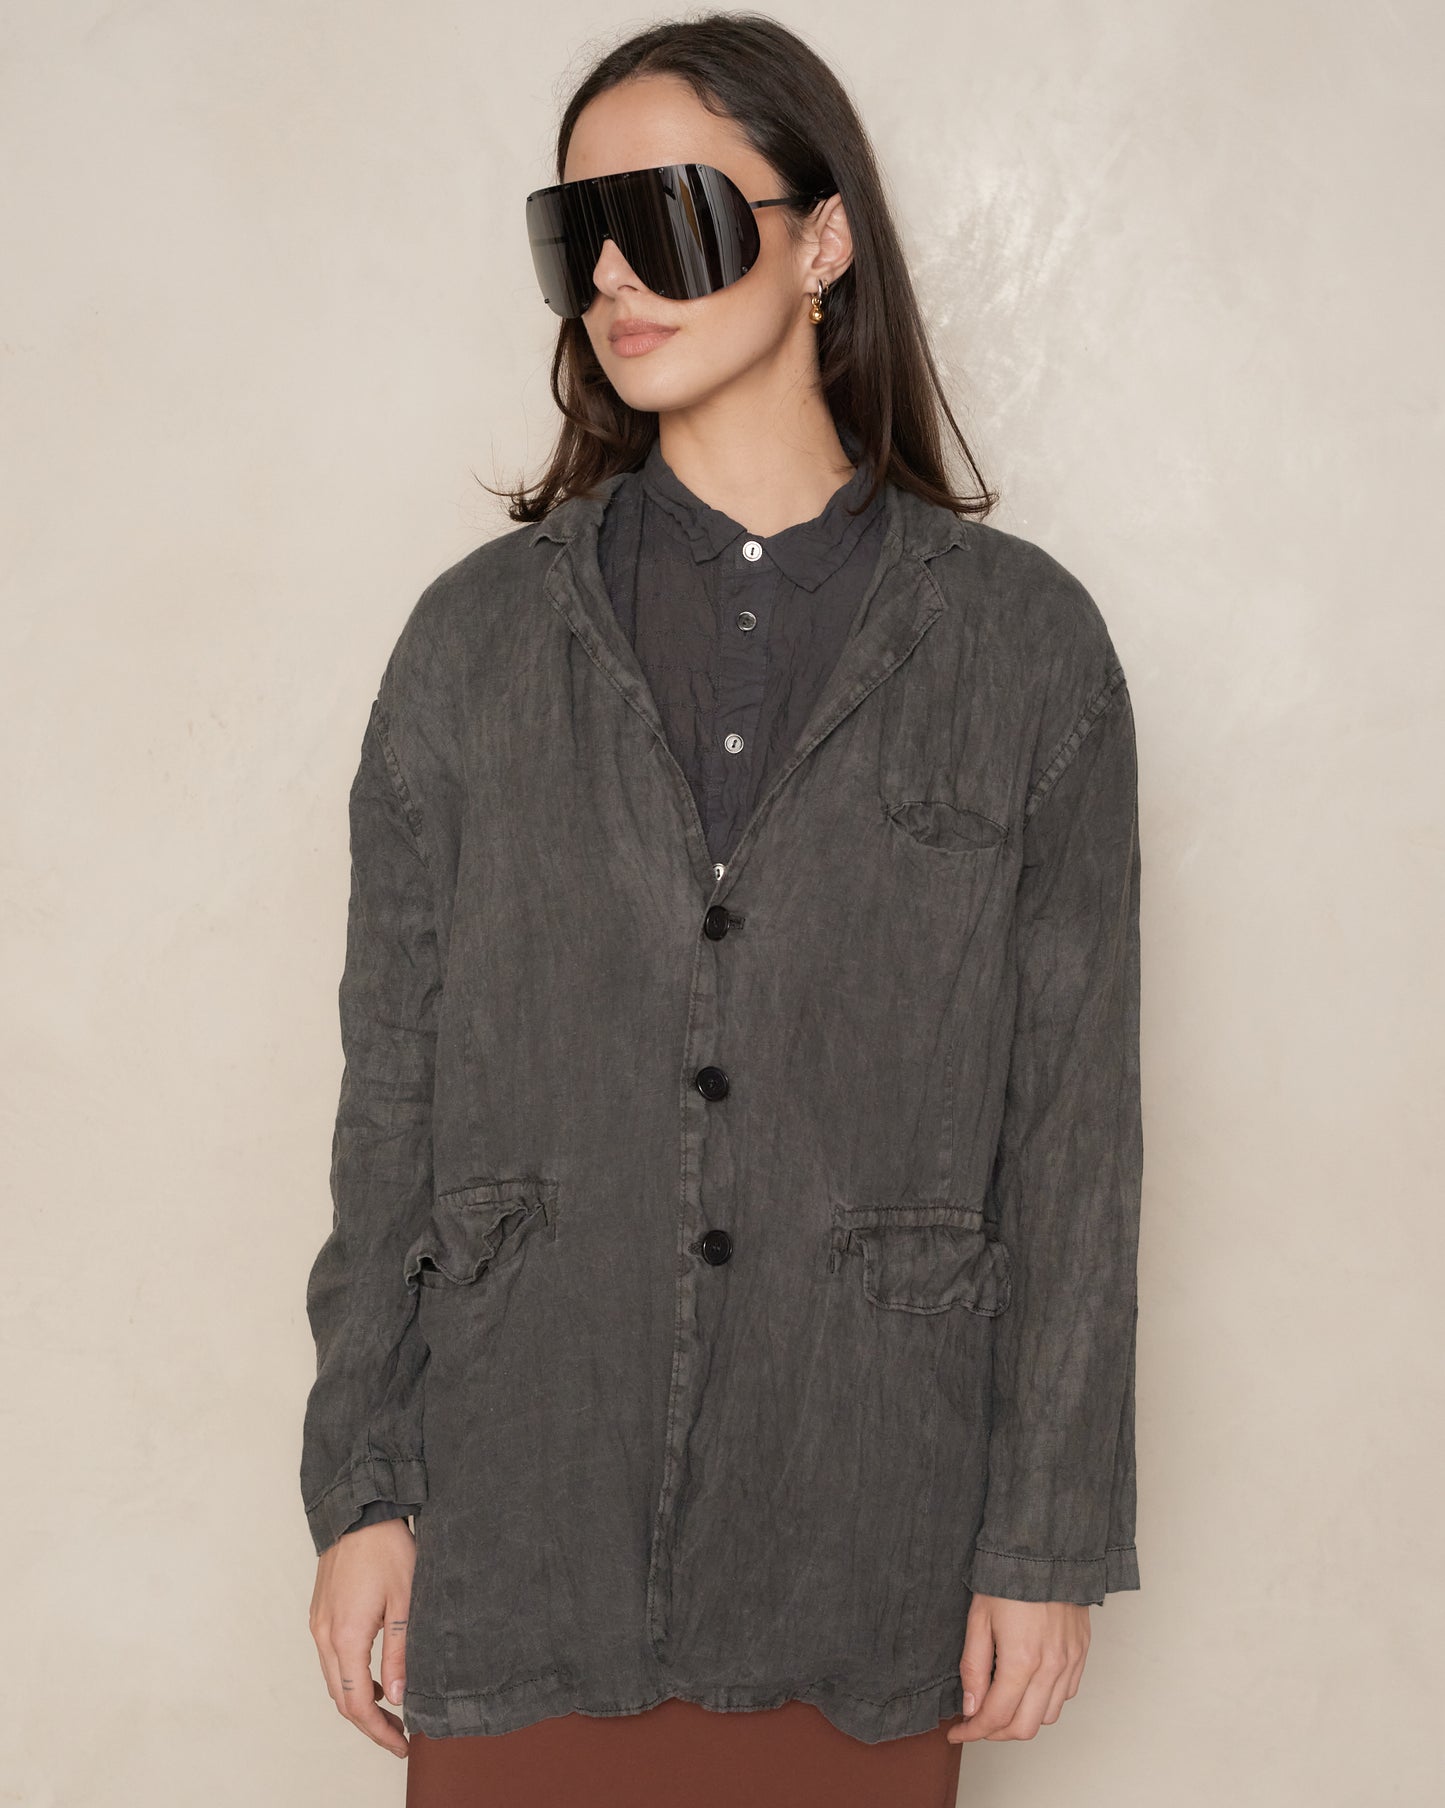 Charcoal Linen Canvas Tailored Jacket